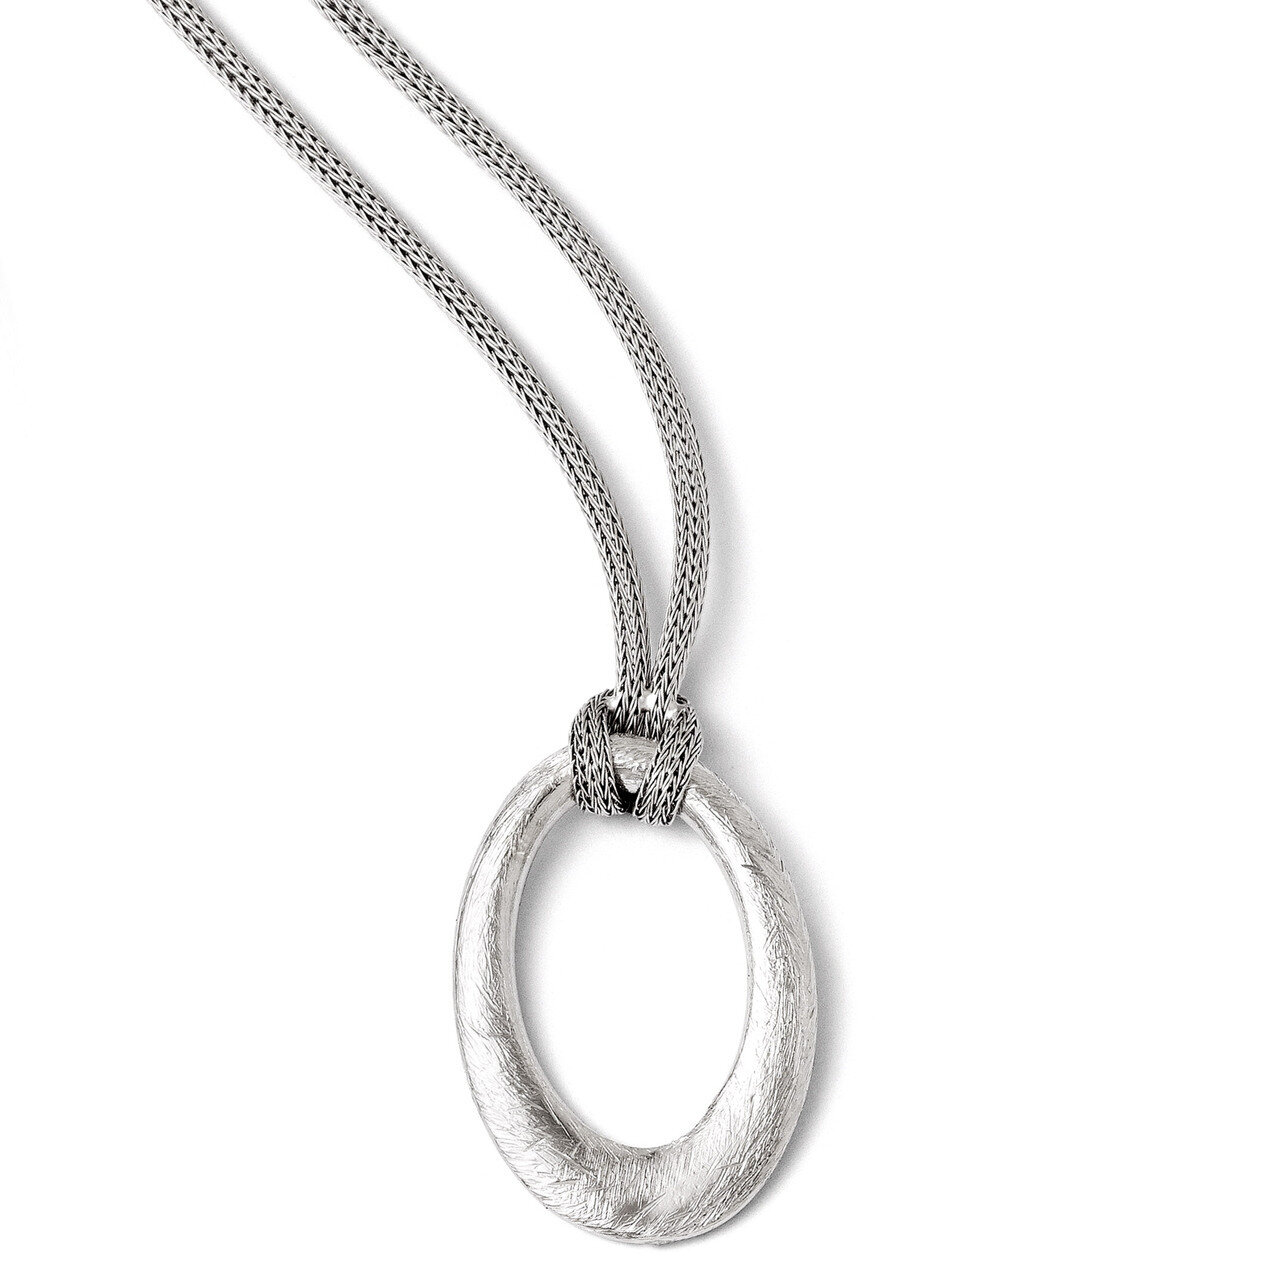 Scratch Finish Mesh Necklace with 2 Inch Extension - Sterling Silver HB-QLF258-18.5